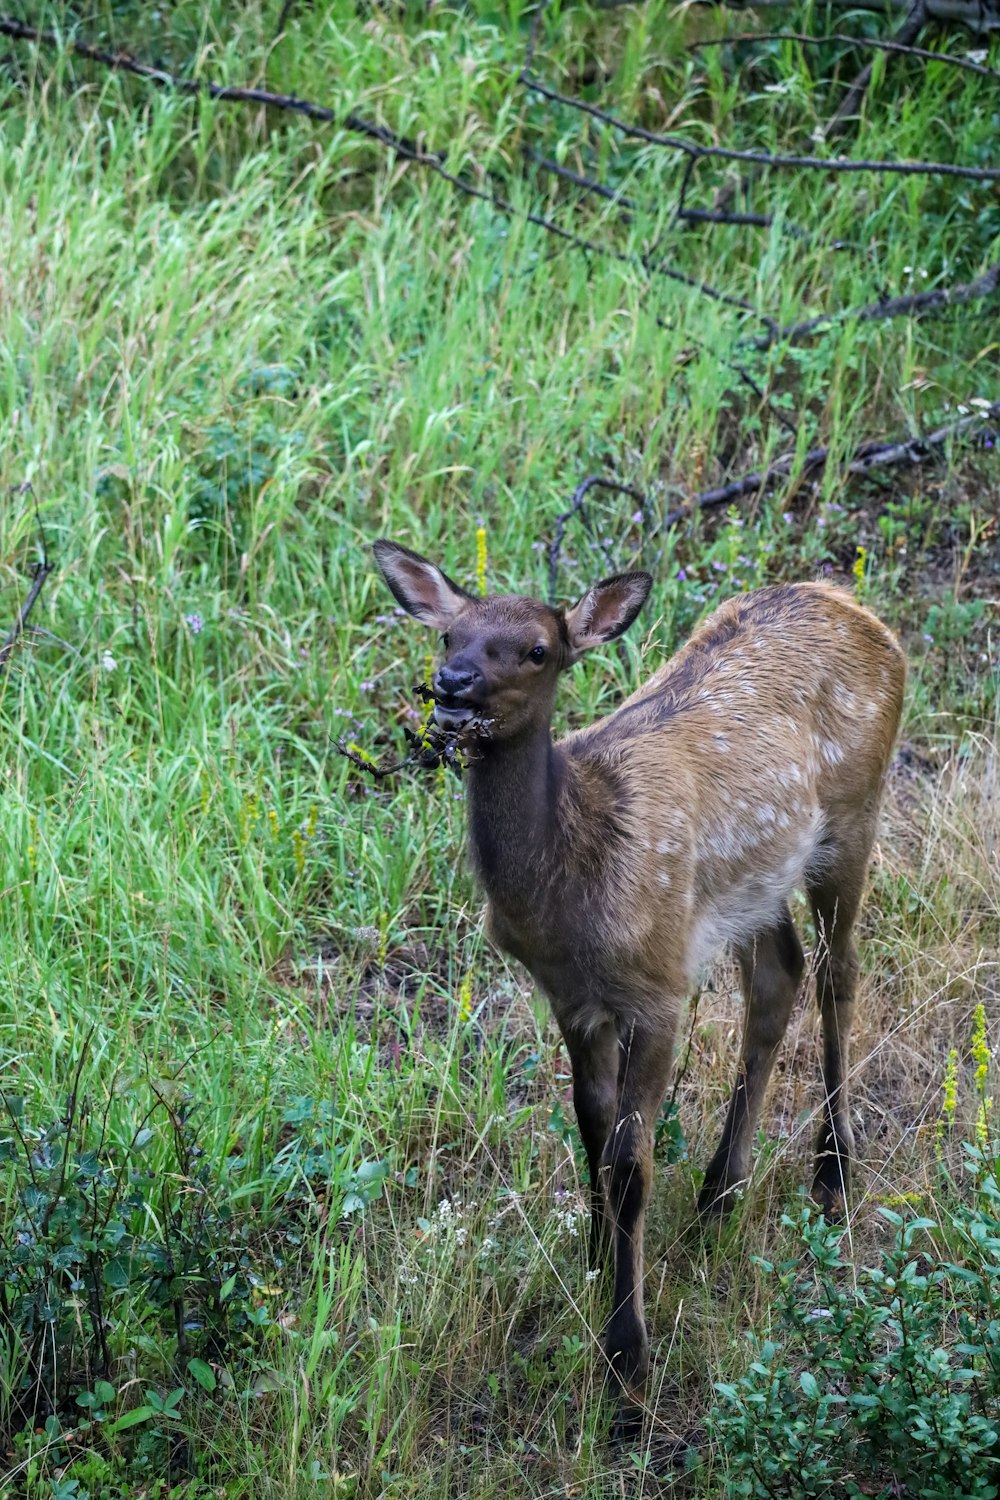 a deer in a grassy area